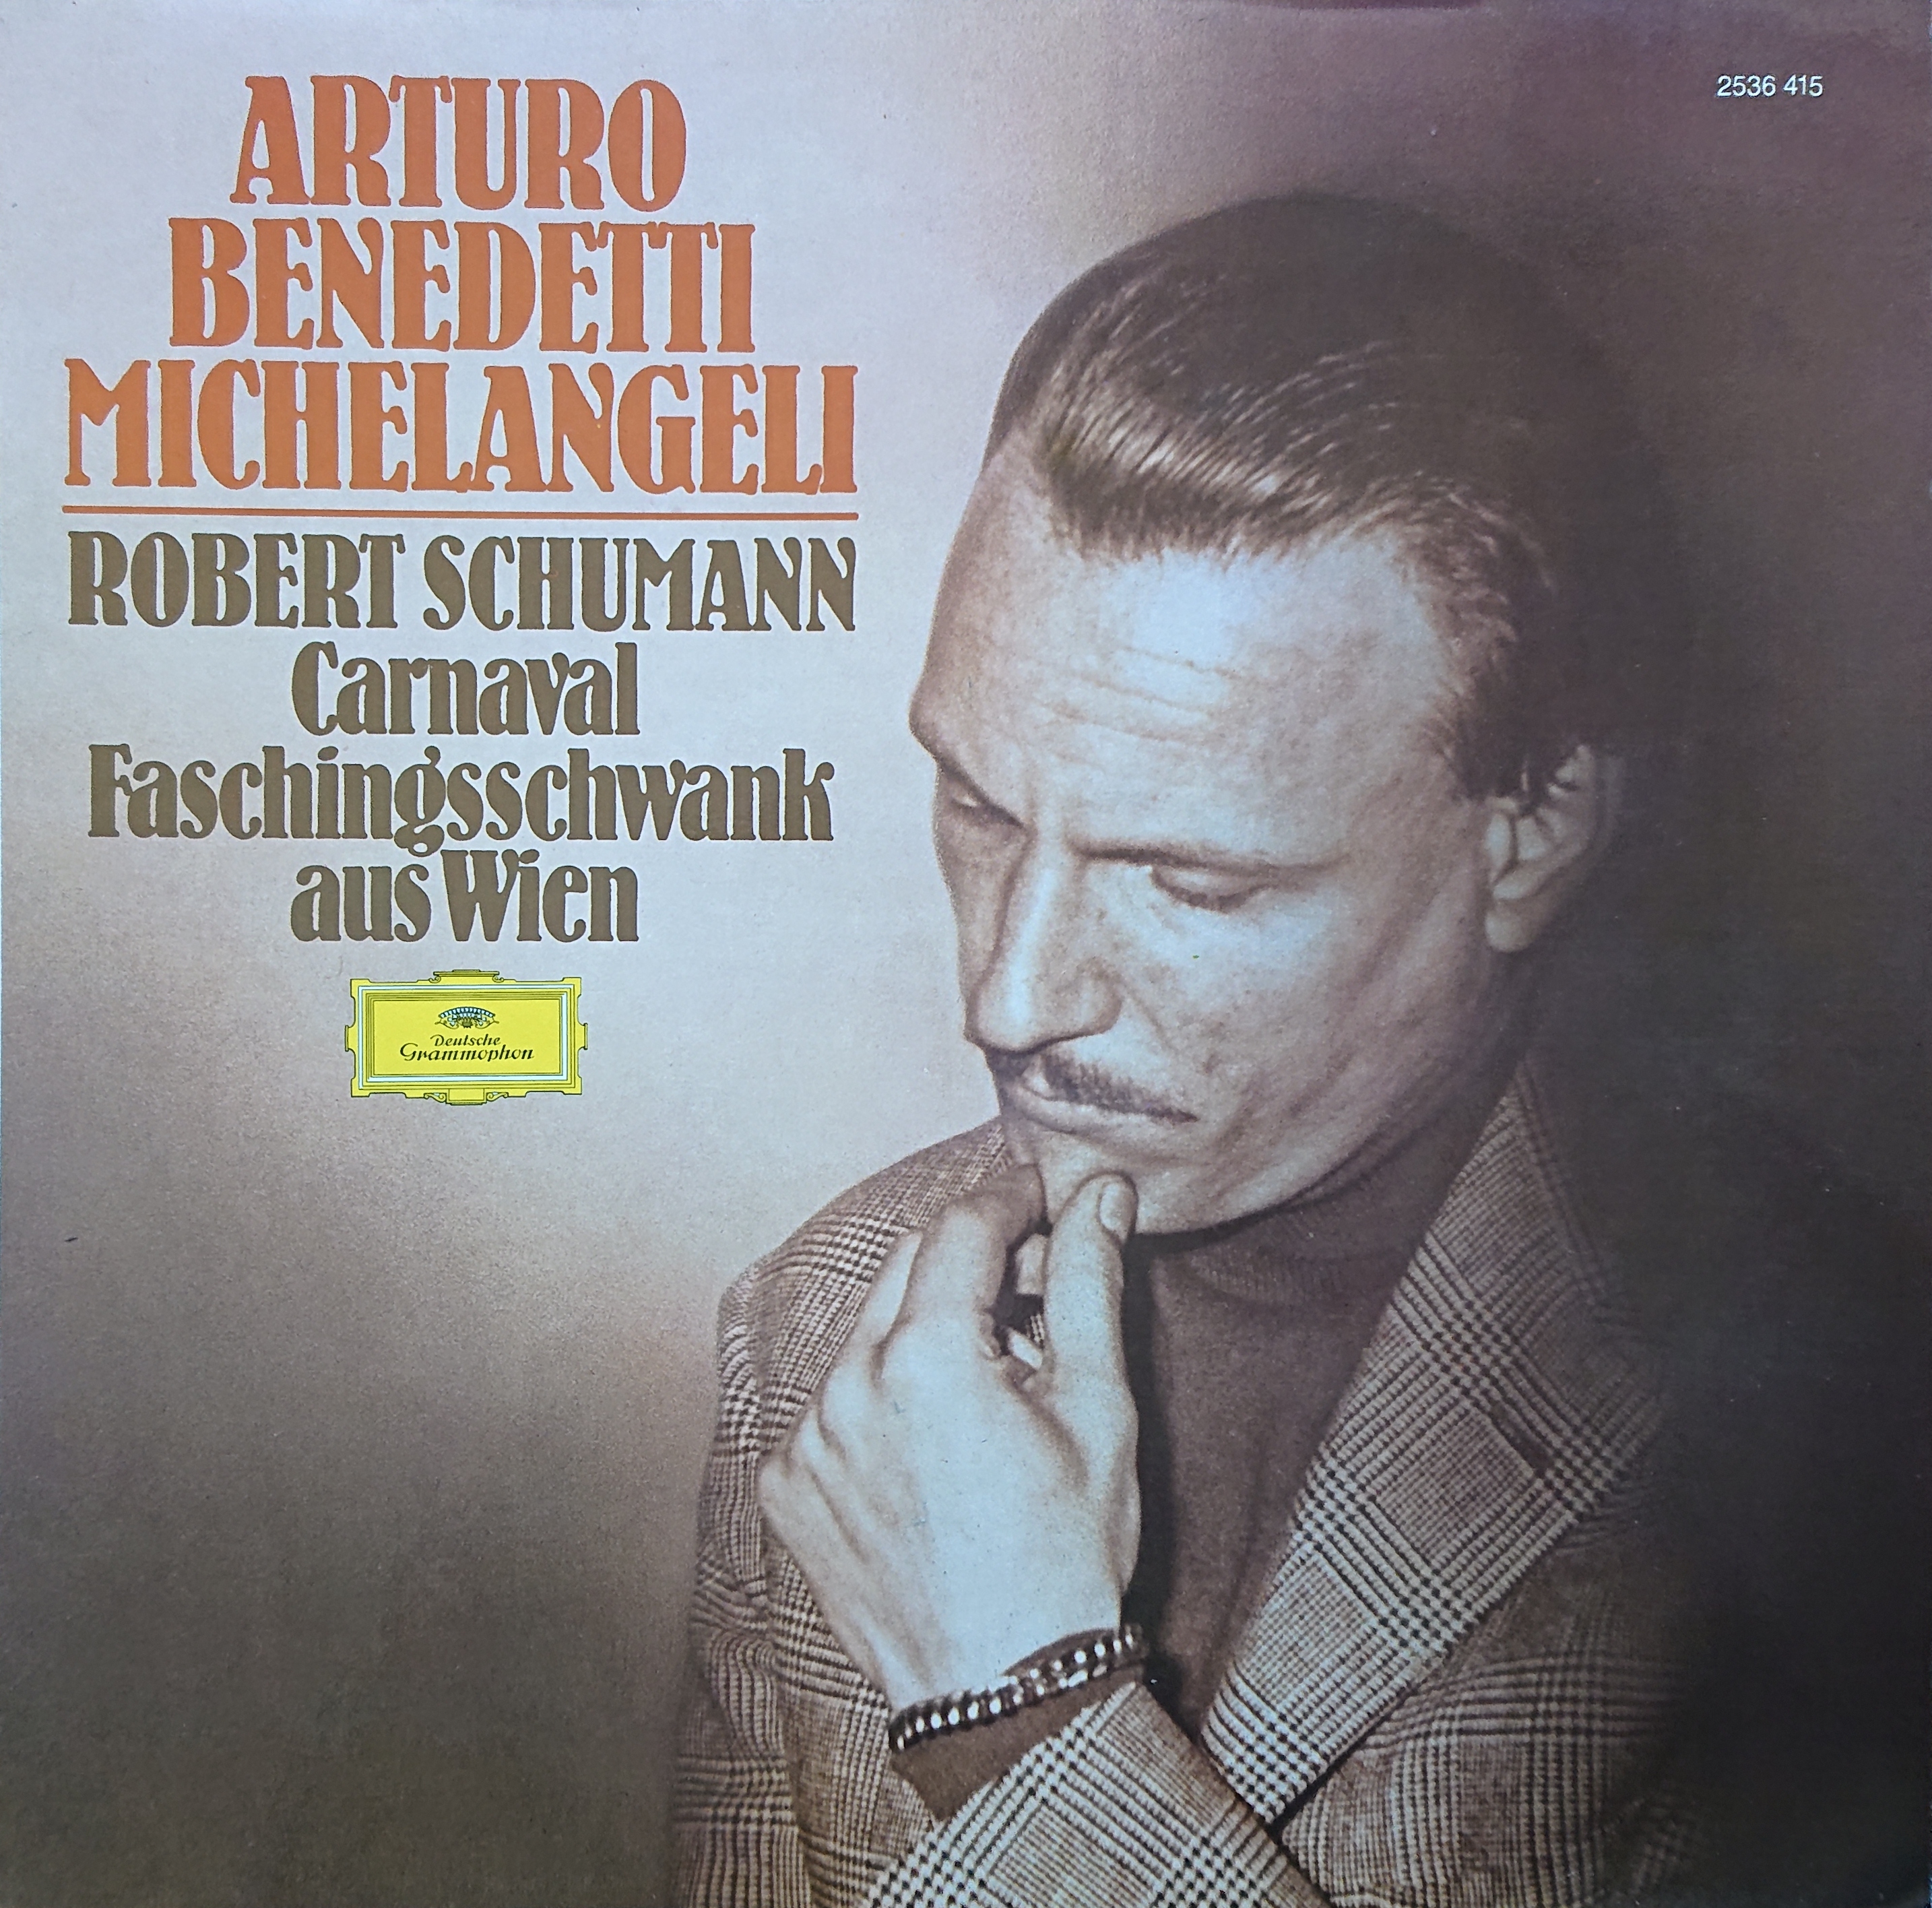 Picture of 2536 415 Carnaval op. 9 by artist Robert Schumann / Arturo Benedetti Michelangeli from the BBC albums - Records and Tapes library